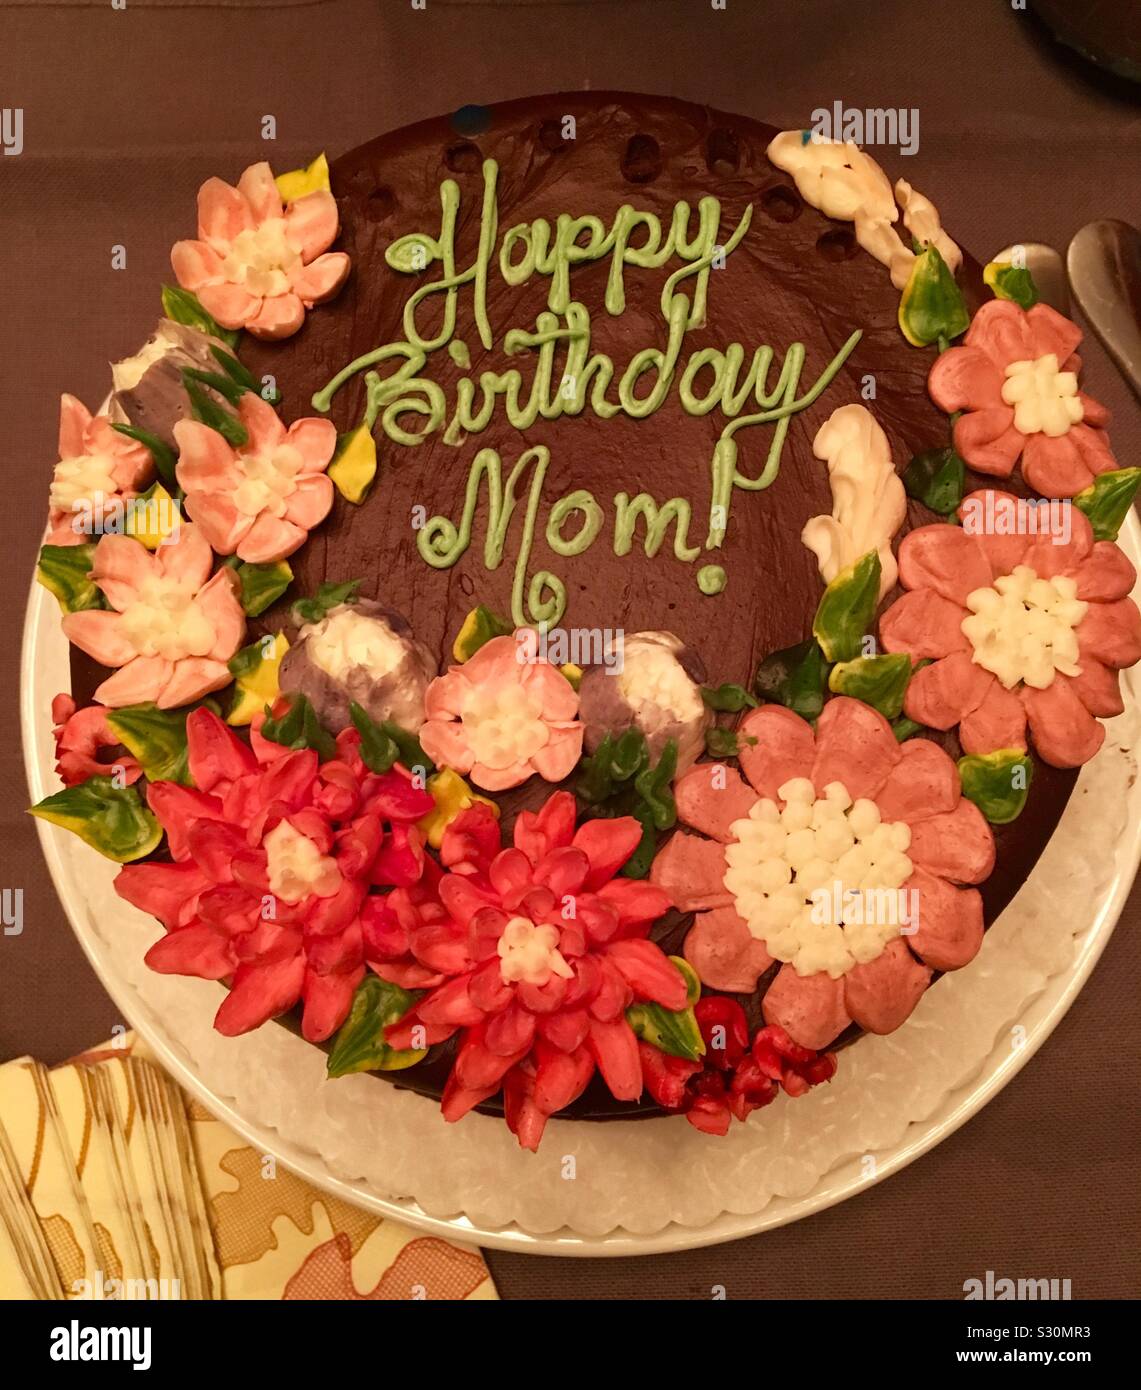 Birthday cake decorated with the words “happy birthday mom” and ...